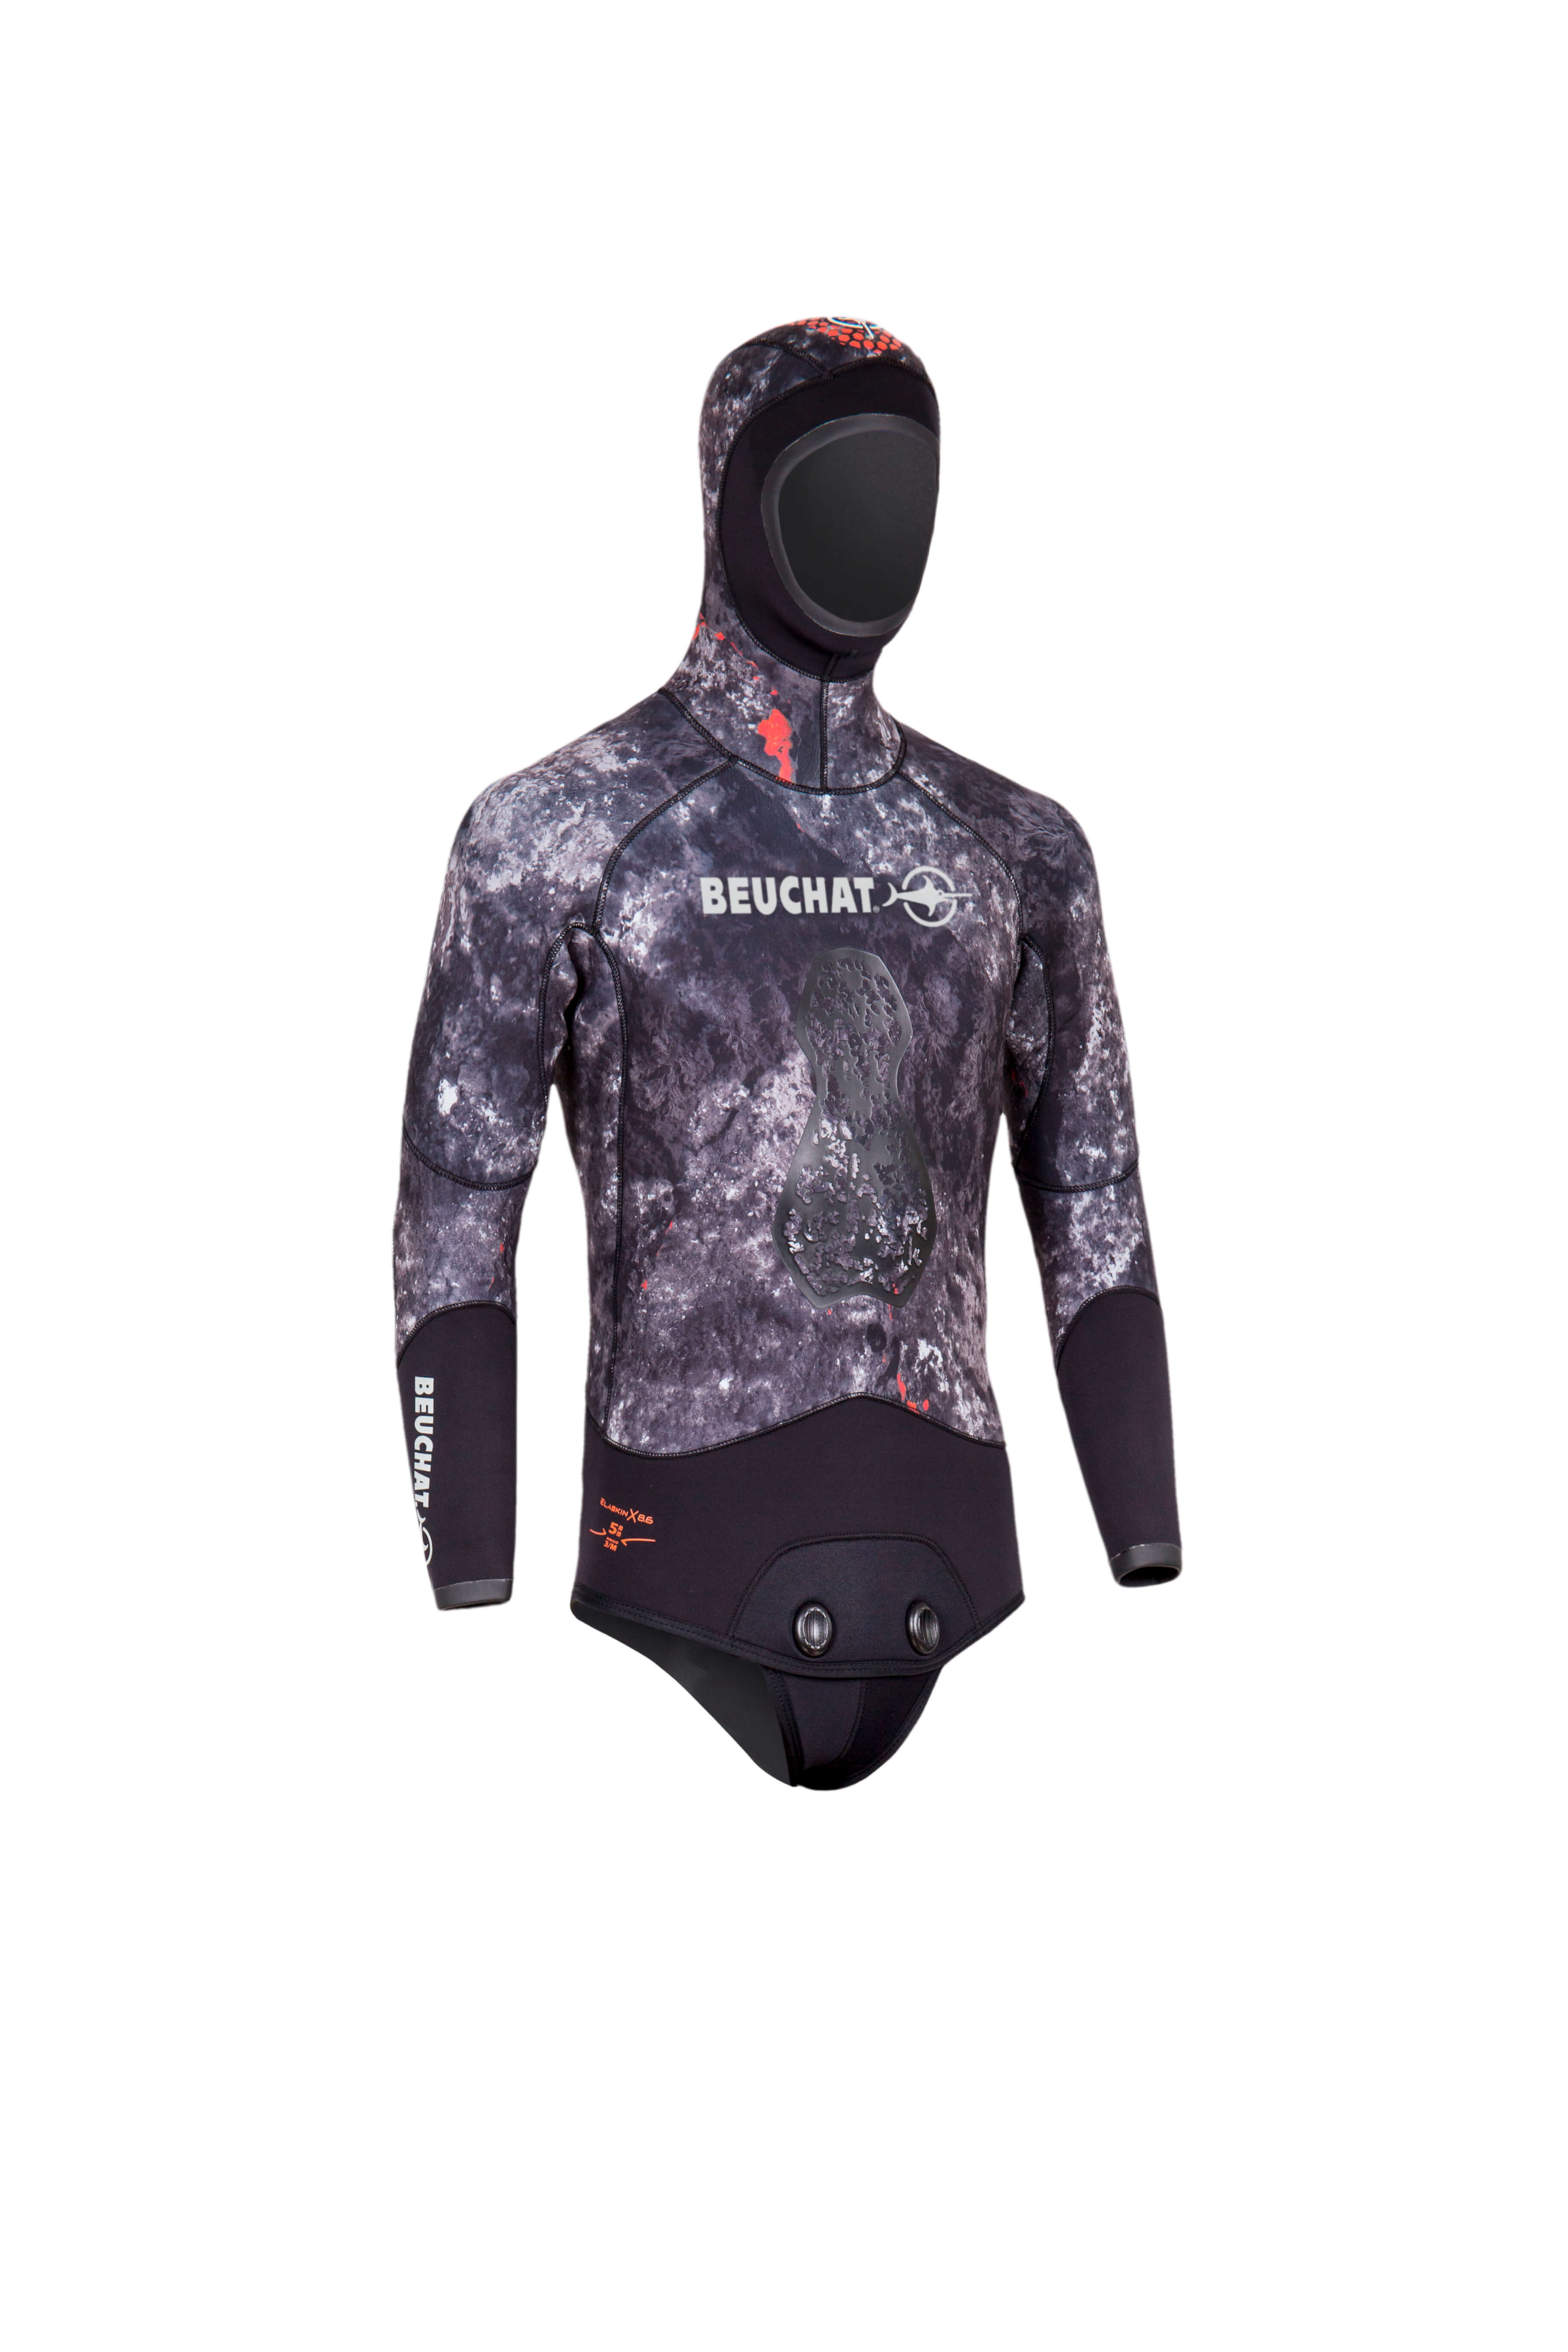 Beuchat Trigoblack 5mm Opencell Jacket